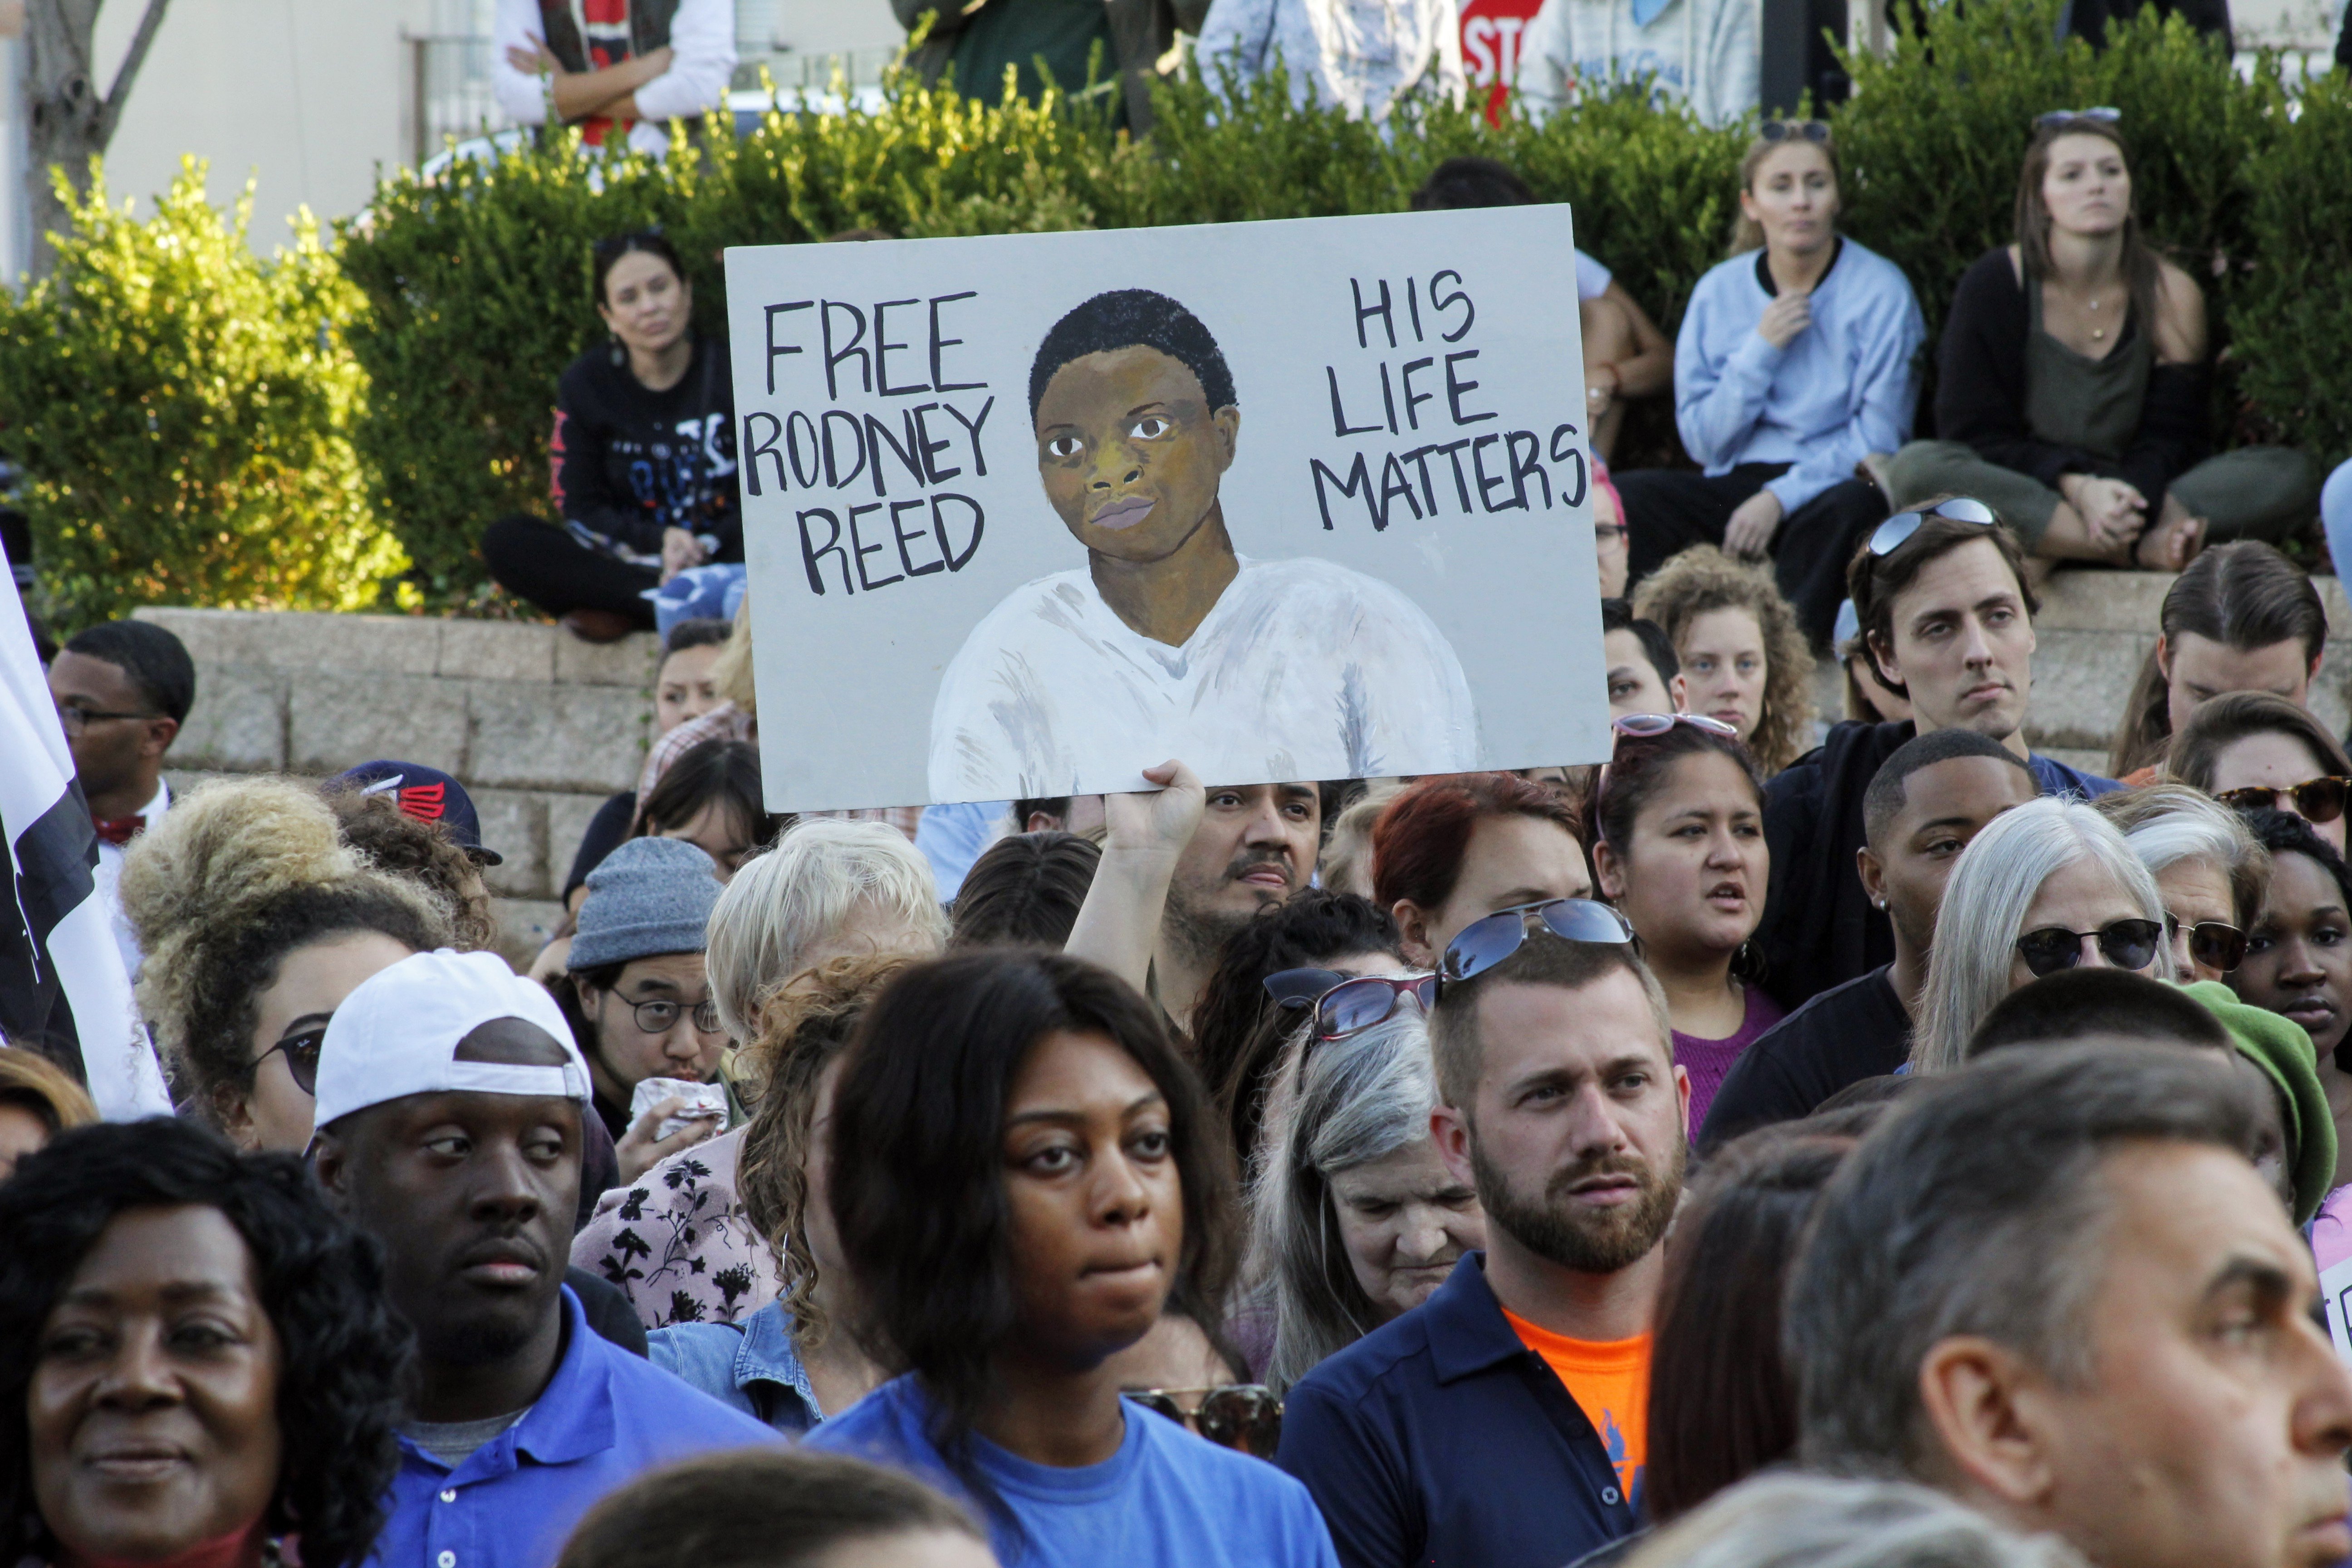 A crowd gathers at the governor's mansion in downtown Austin on Saturday, November 9, 2019, at a rally for Rodney Reed.